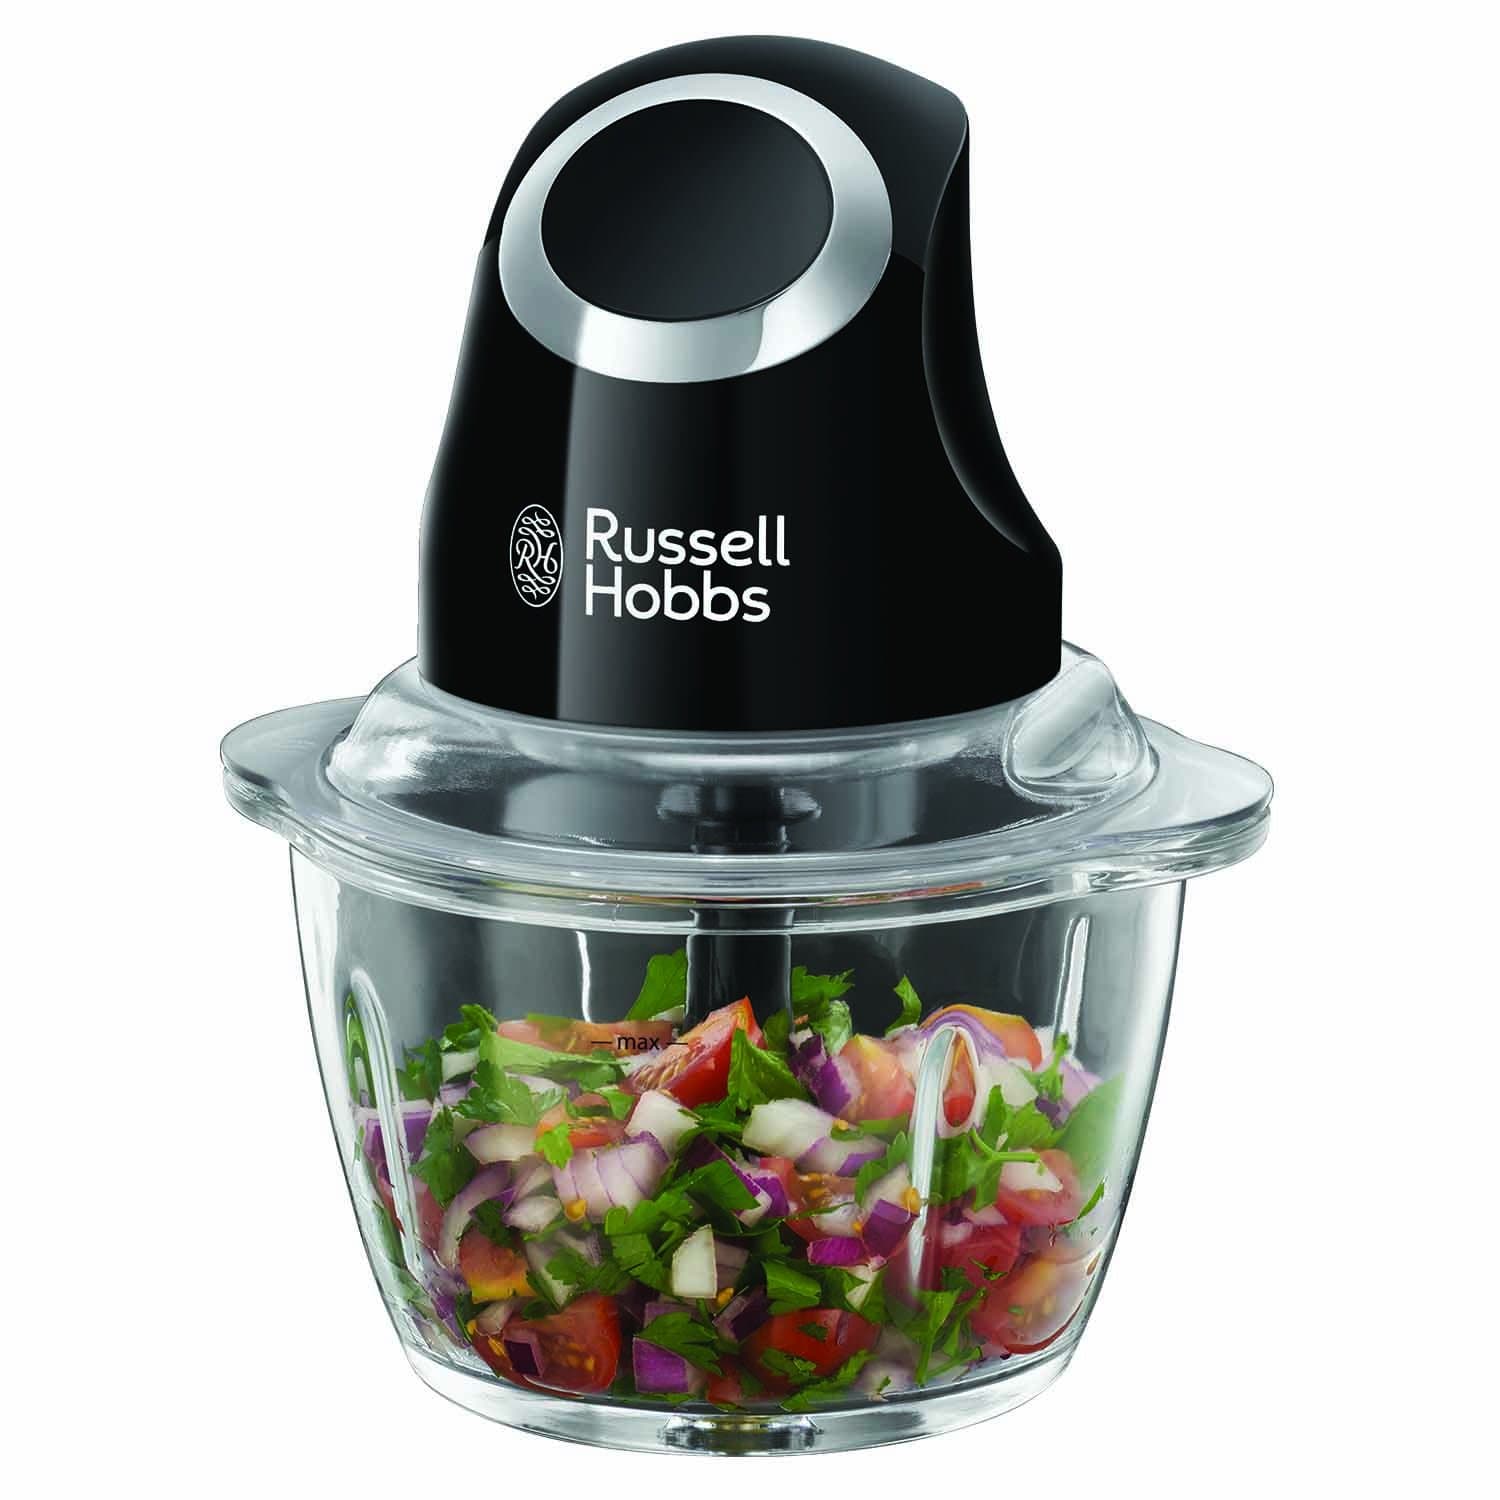 RUSSELL HOBBS DESIRE MATTE BLACK ELECTRIC MINI CHOPPER WITH 500ML CAPACITY GLASS BOWL & STAINLESS STEEL BLADE, 200W  - 24662